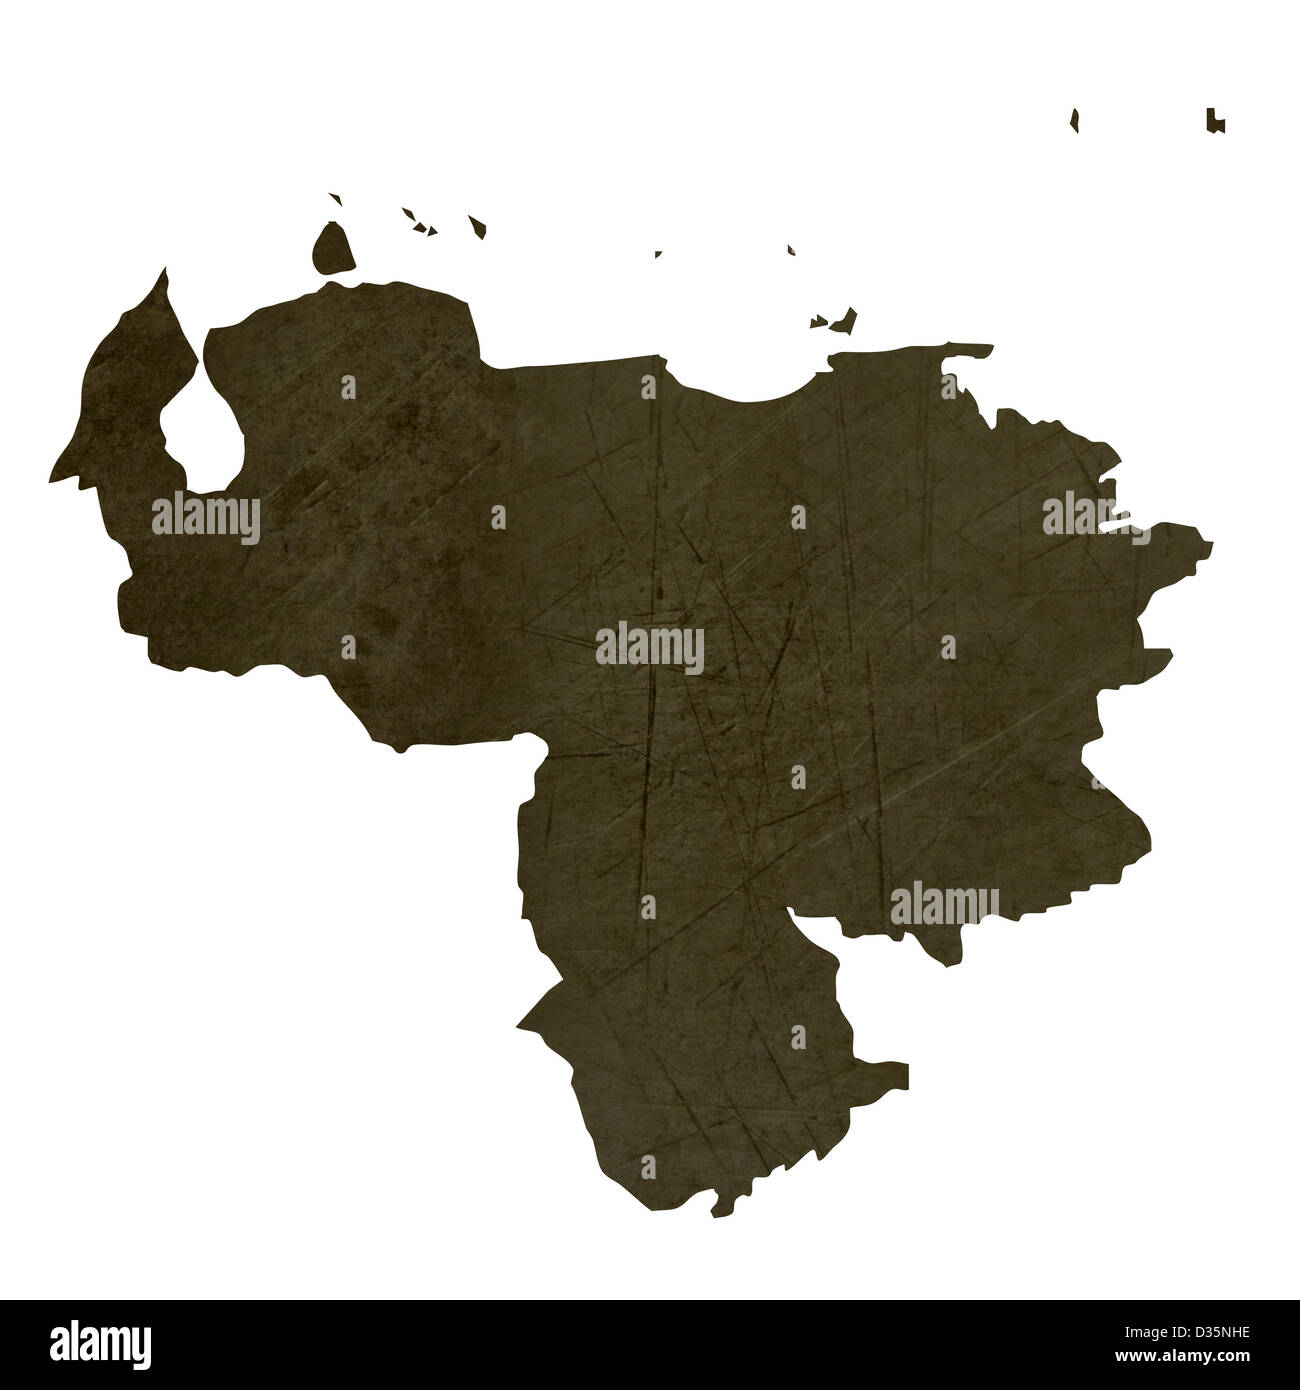 Dark silhouetted and textured map of Venezuela isolated on white background. Stock Photo